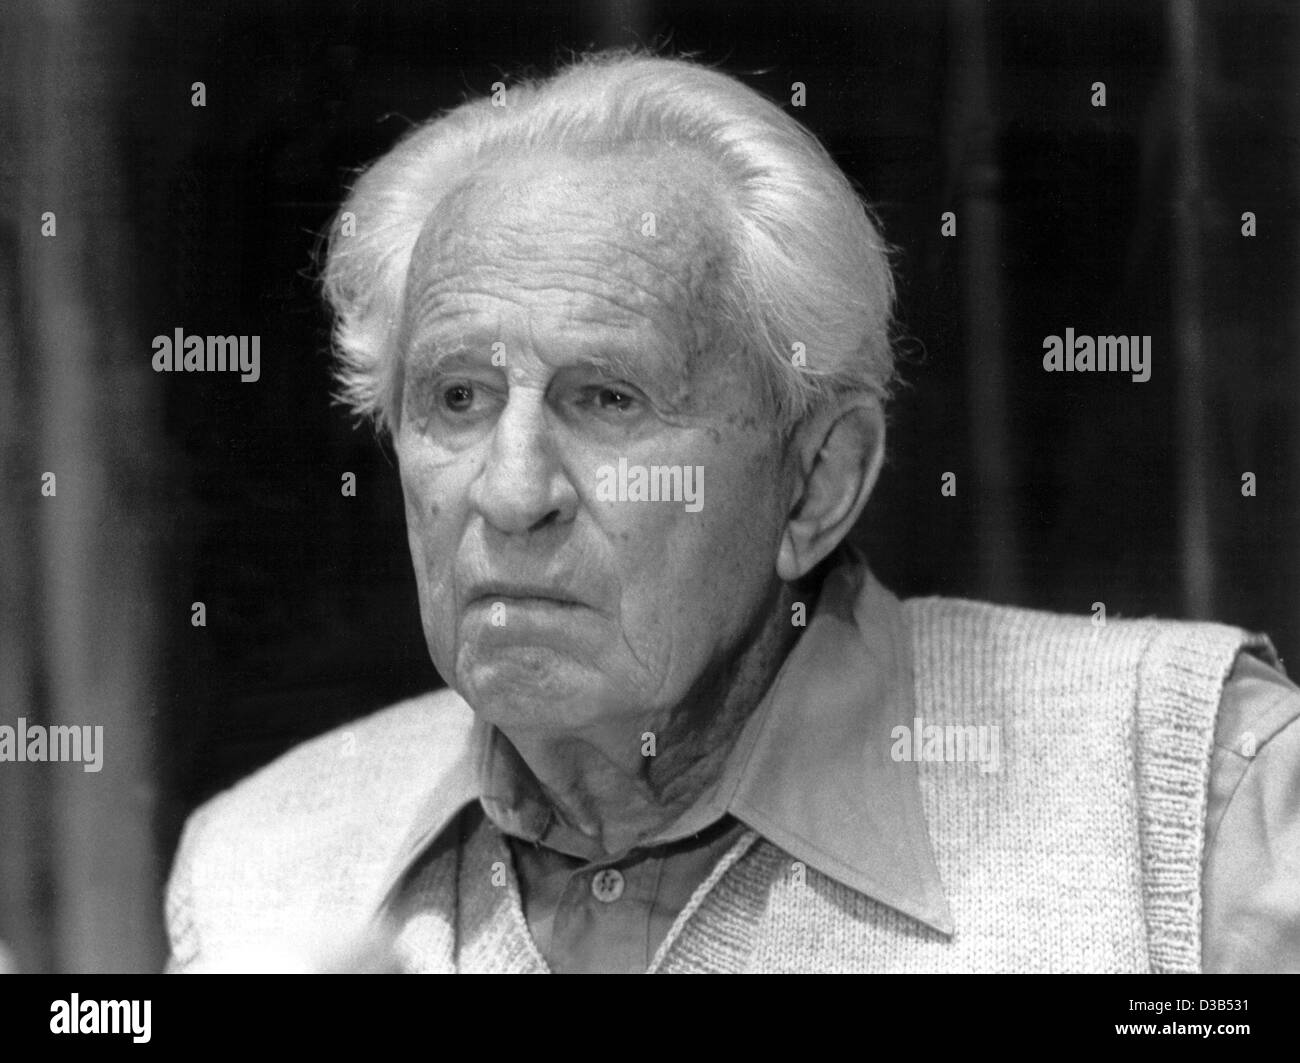 (dpa files) - Herbert Marcuse, German-US philosopher and socialist, pictured in Germany, 18 May 1979. He was a hero of New Left radicals and provided a rationale for the student revolts of the 1960s in the United States and Europe. Stock Photo